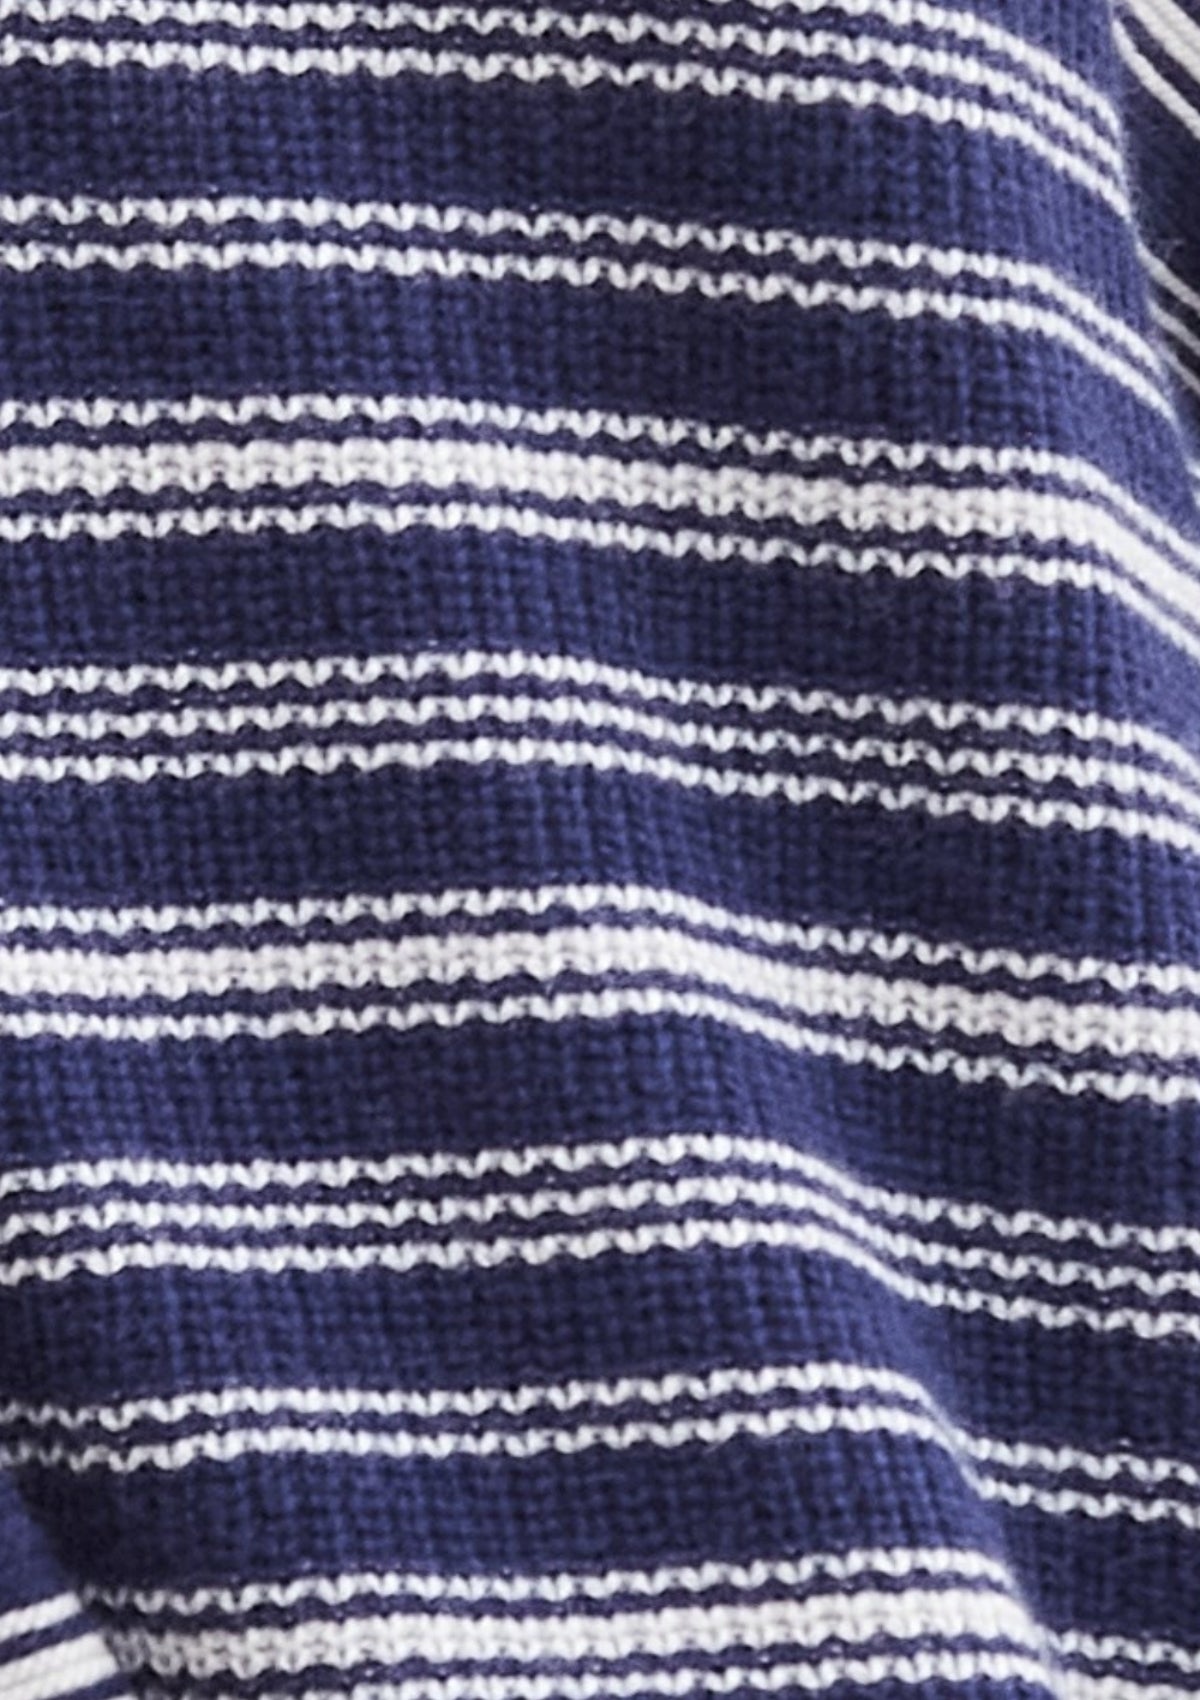 Oversized Ribbed Polo Neck Sweater in Blue Stripe